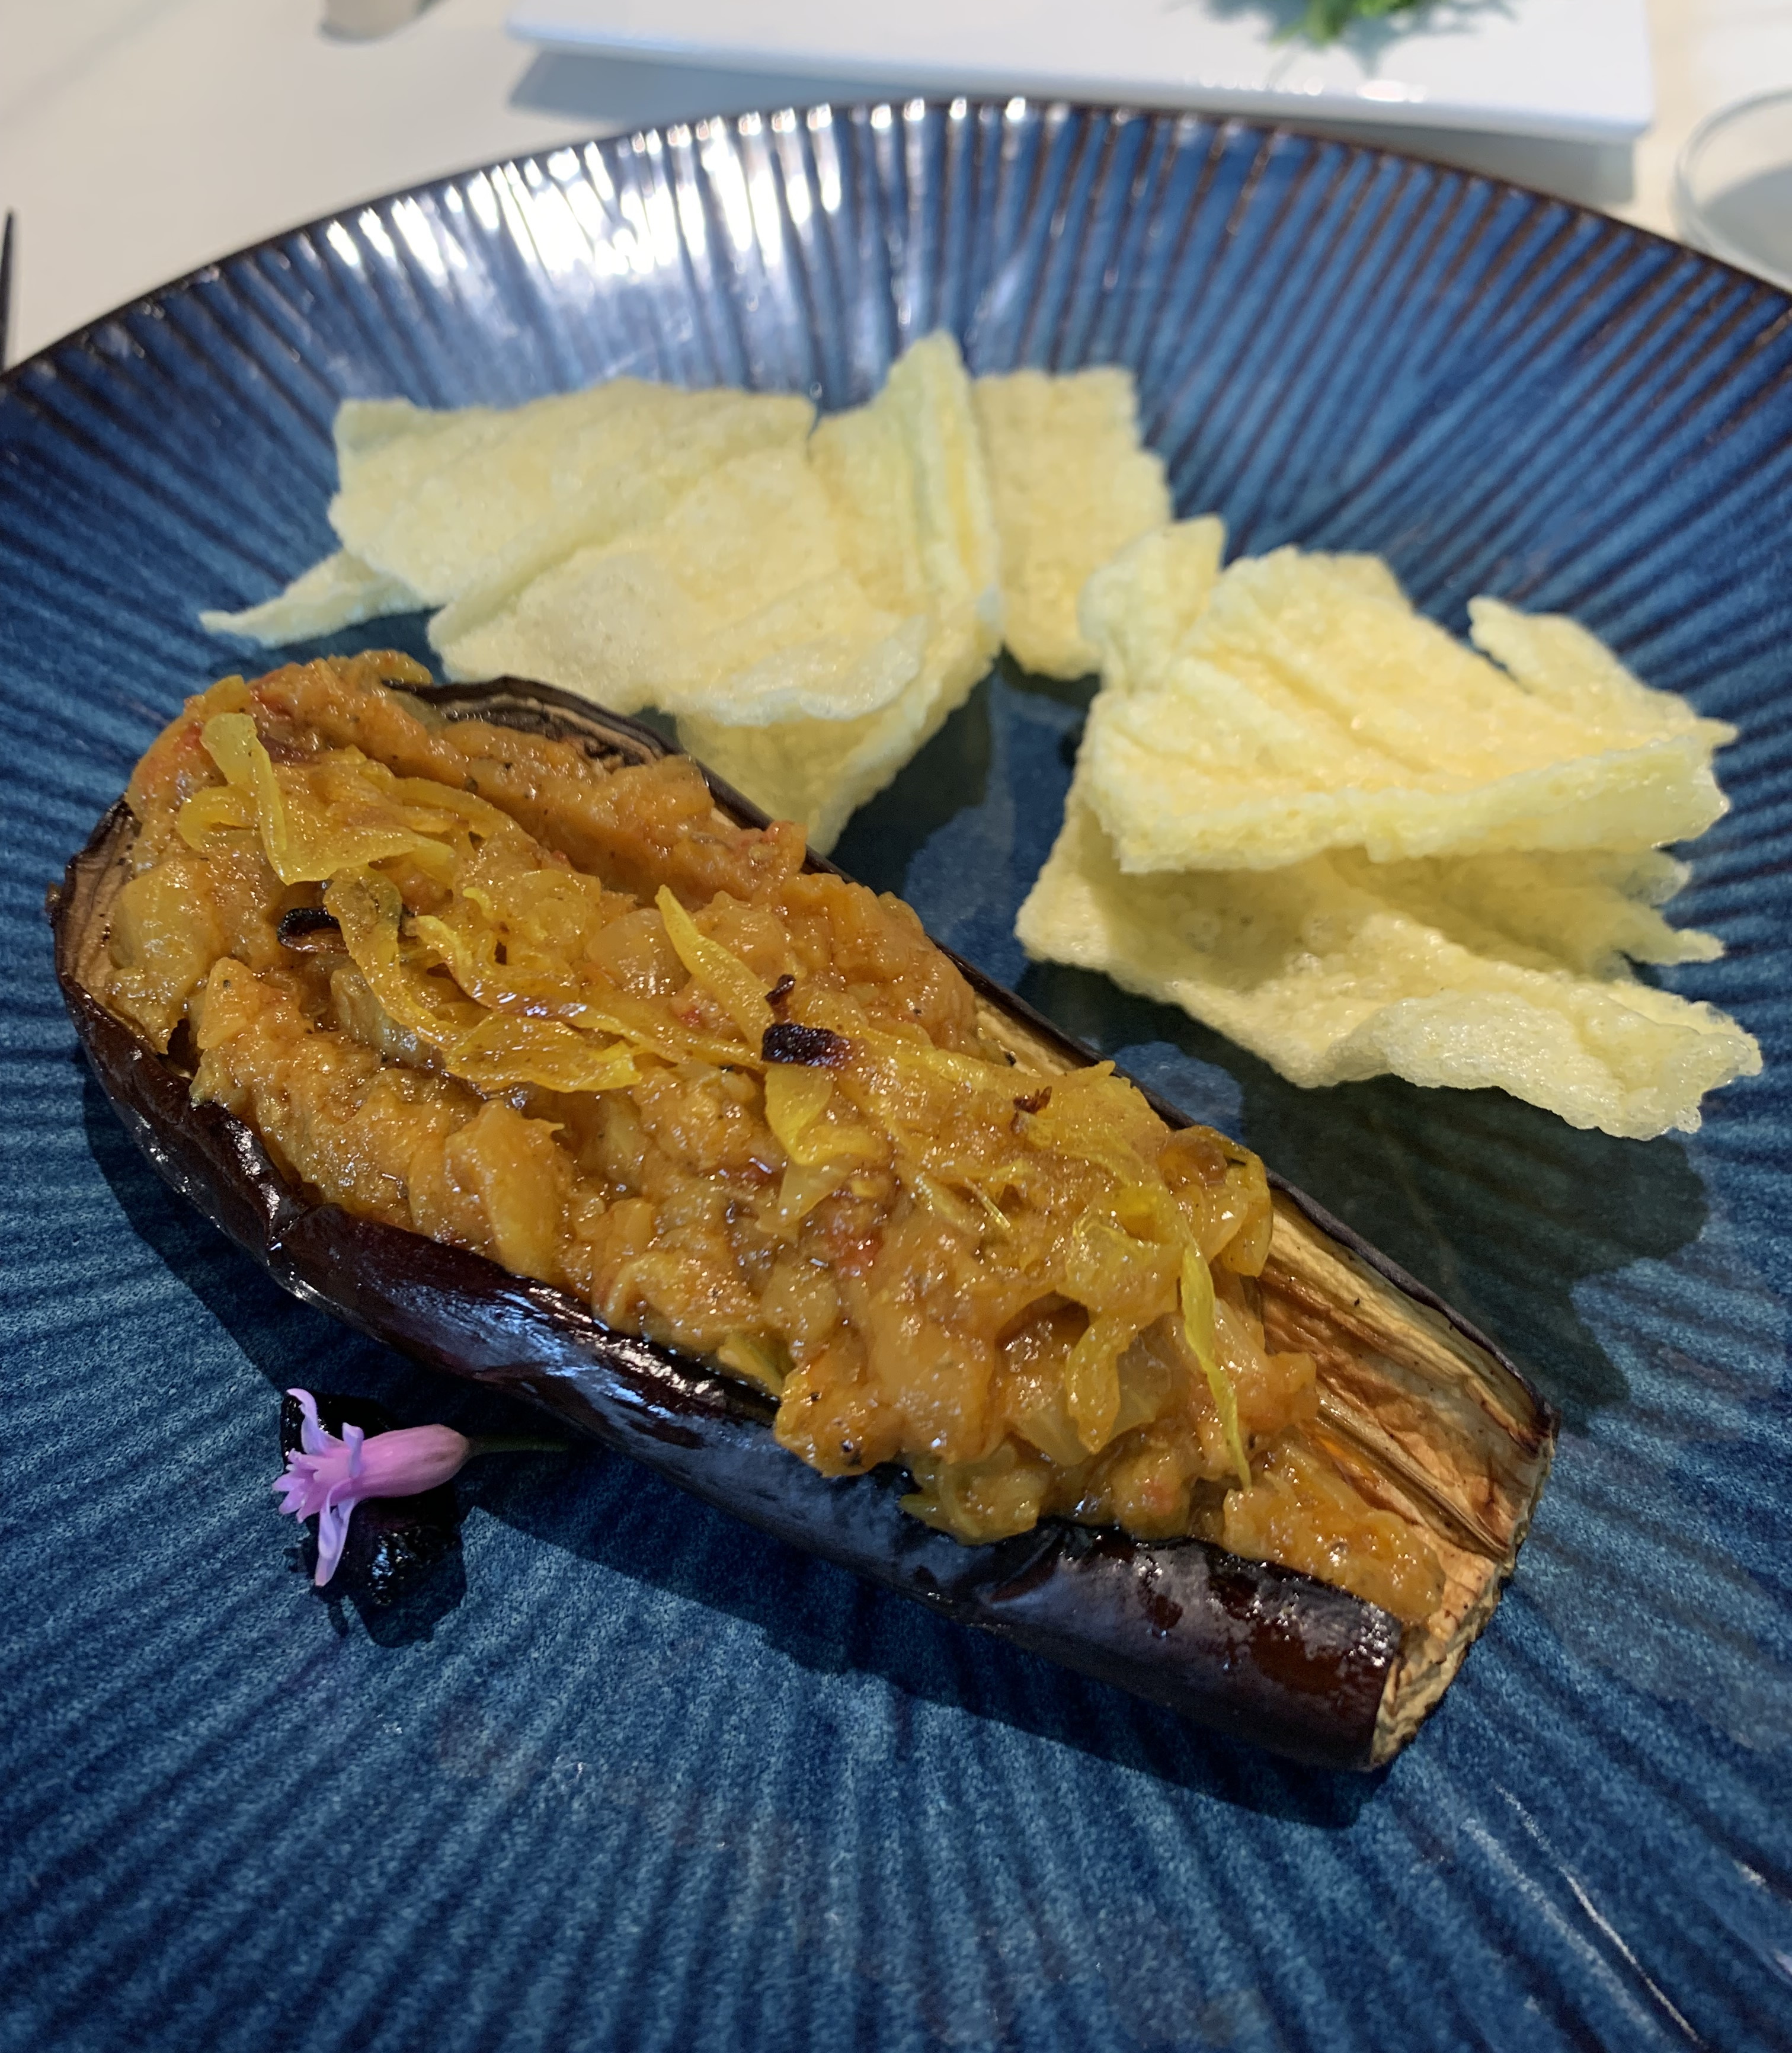 An eggplant that's has its insides scooped out, added to, and put back in. The filling is a darker shade of orange that it would normally be. There are some pale chips next to it.